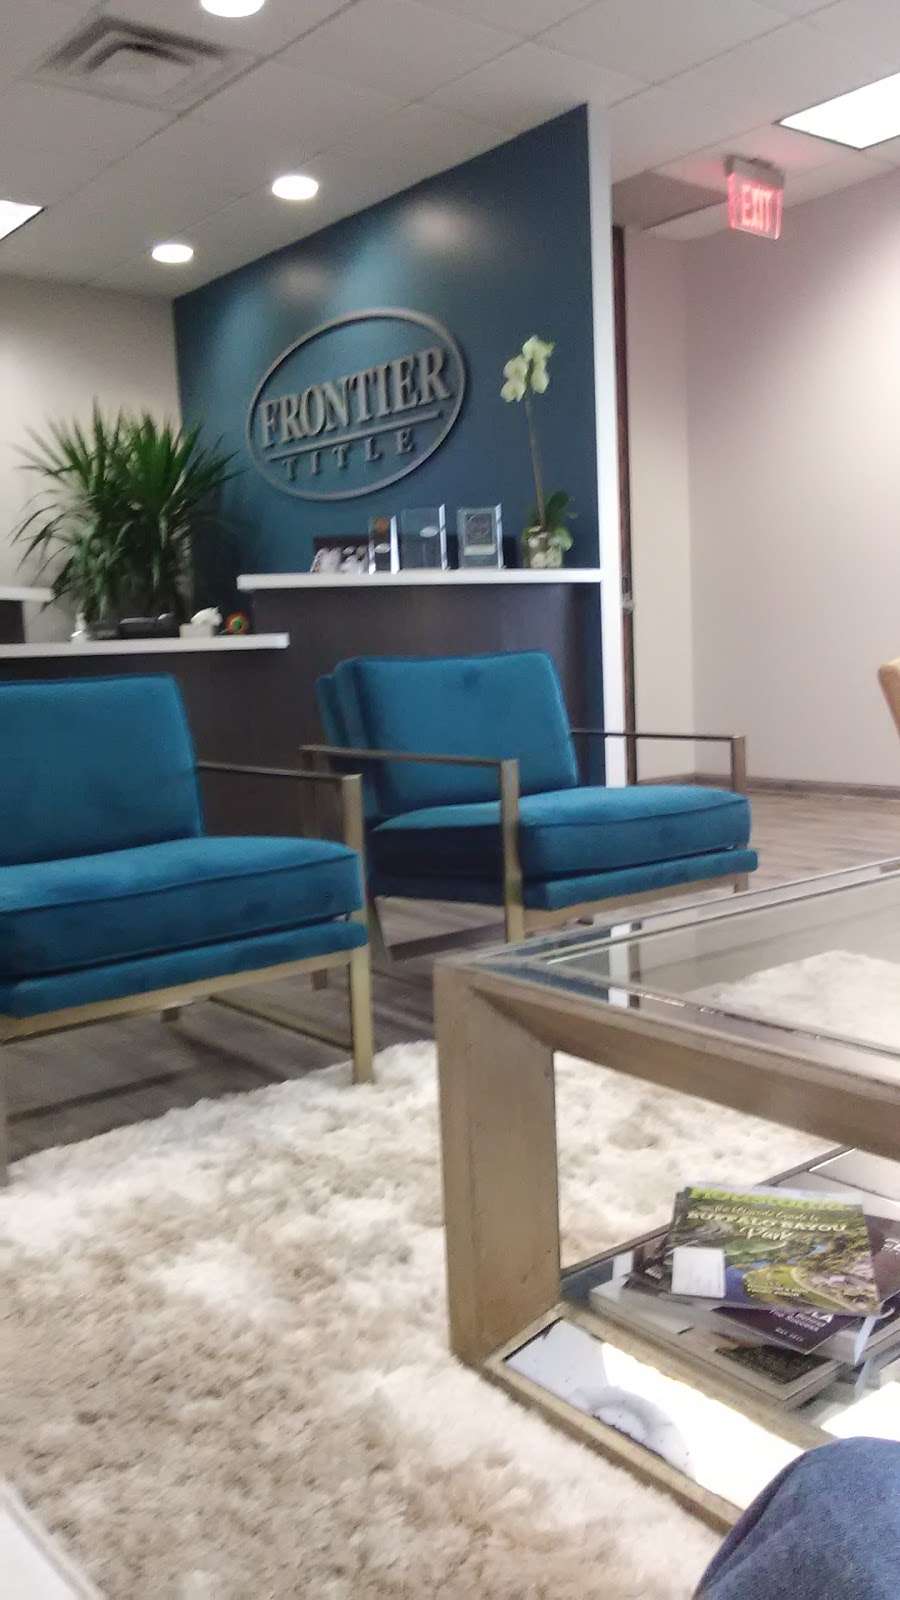 Frontier Title | 1177 W Loop S #1350, Houston, TX 77027, USA | Phone: (713) 840-0208